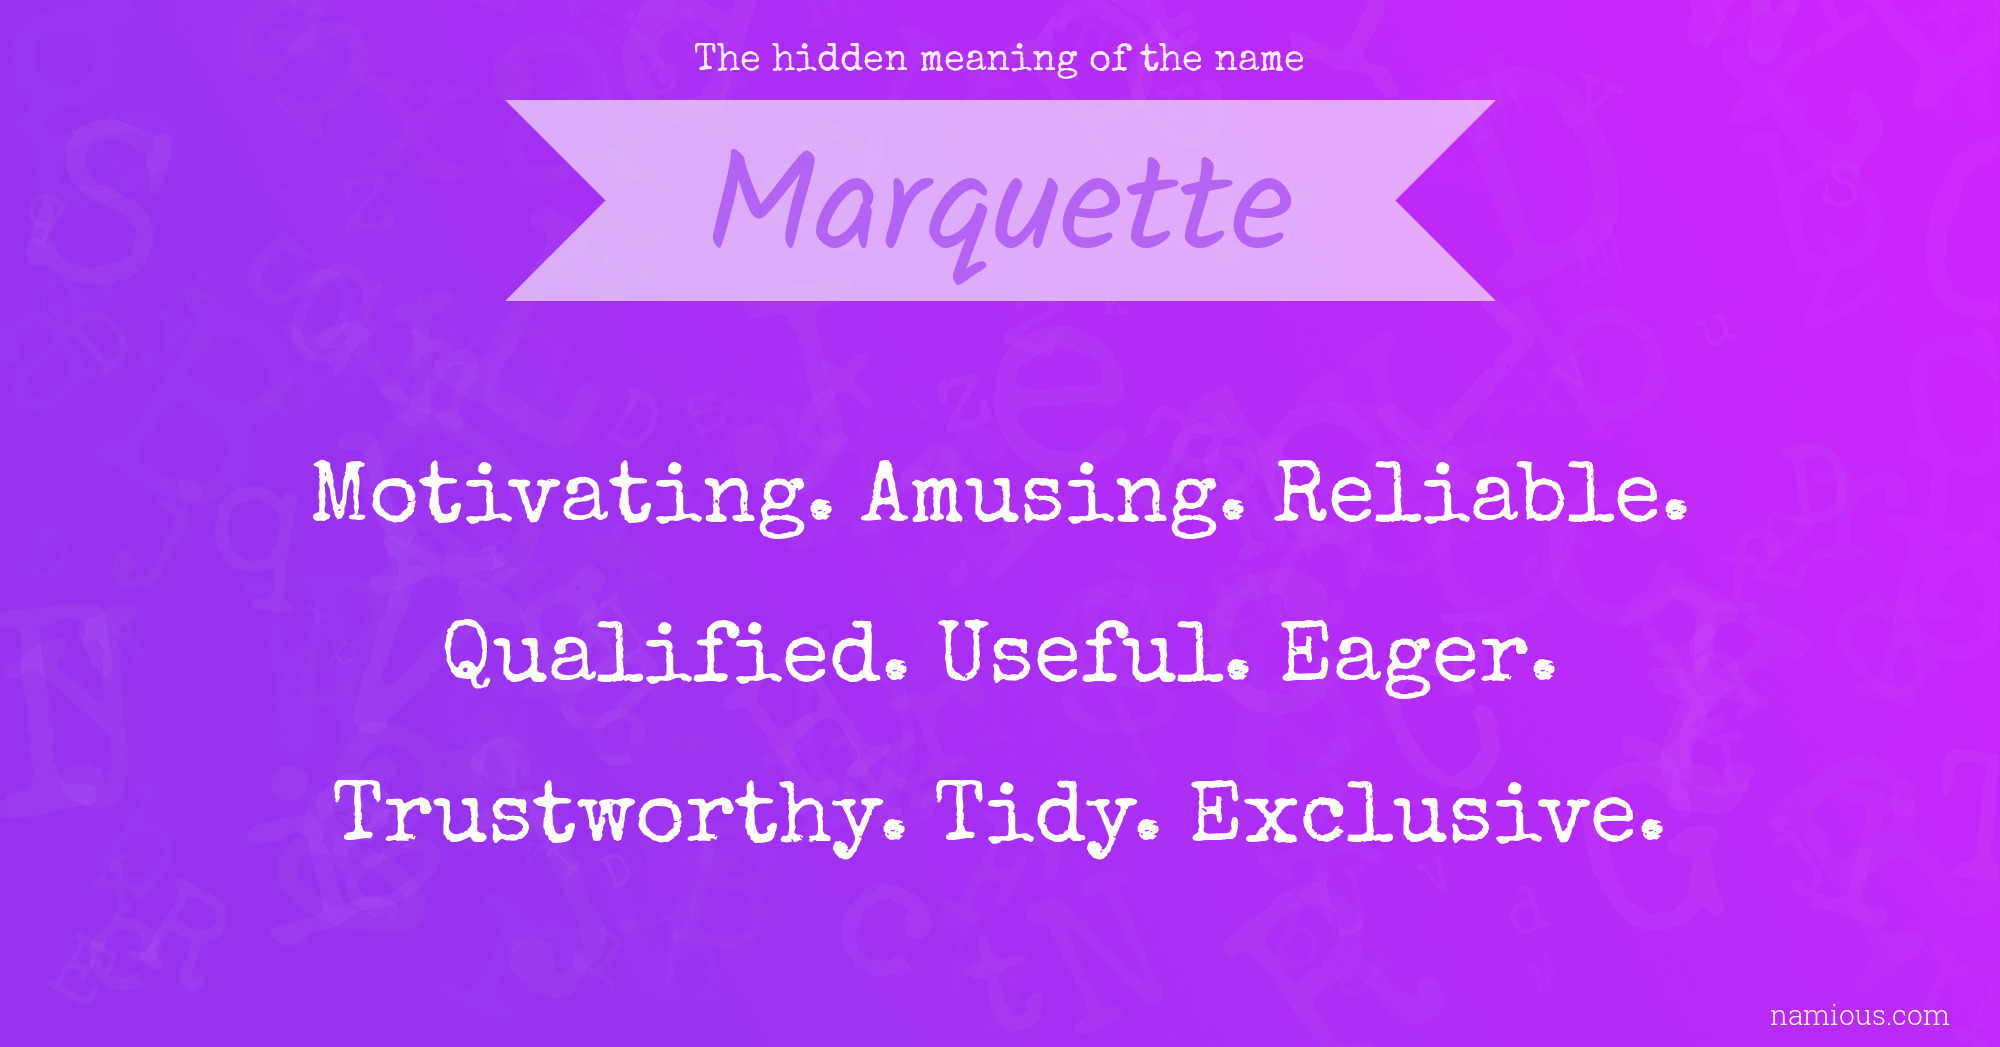 The hidden meaning of the name Marquette